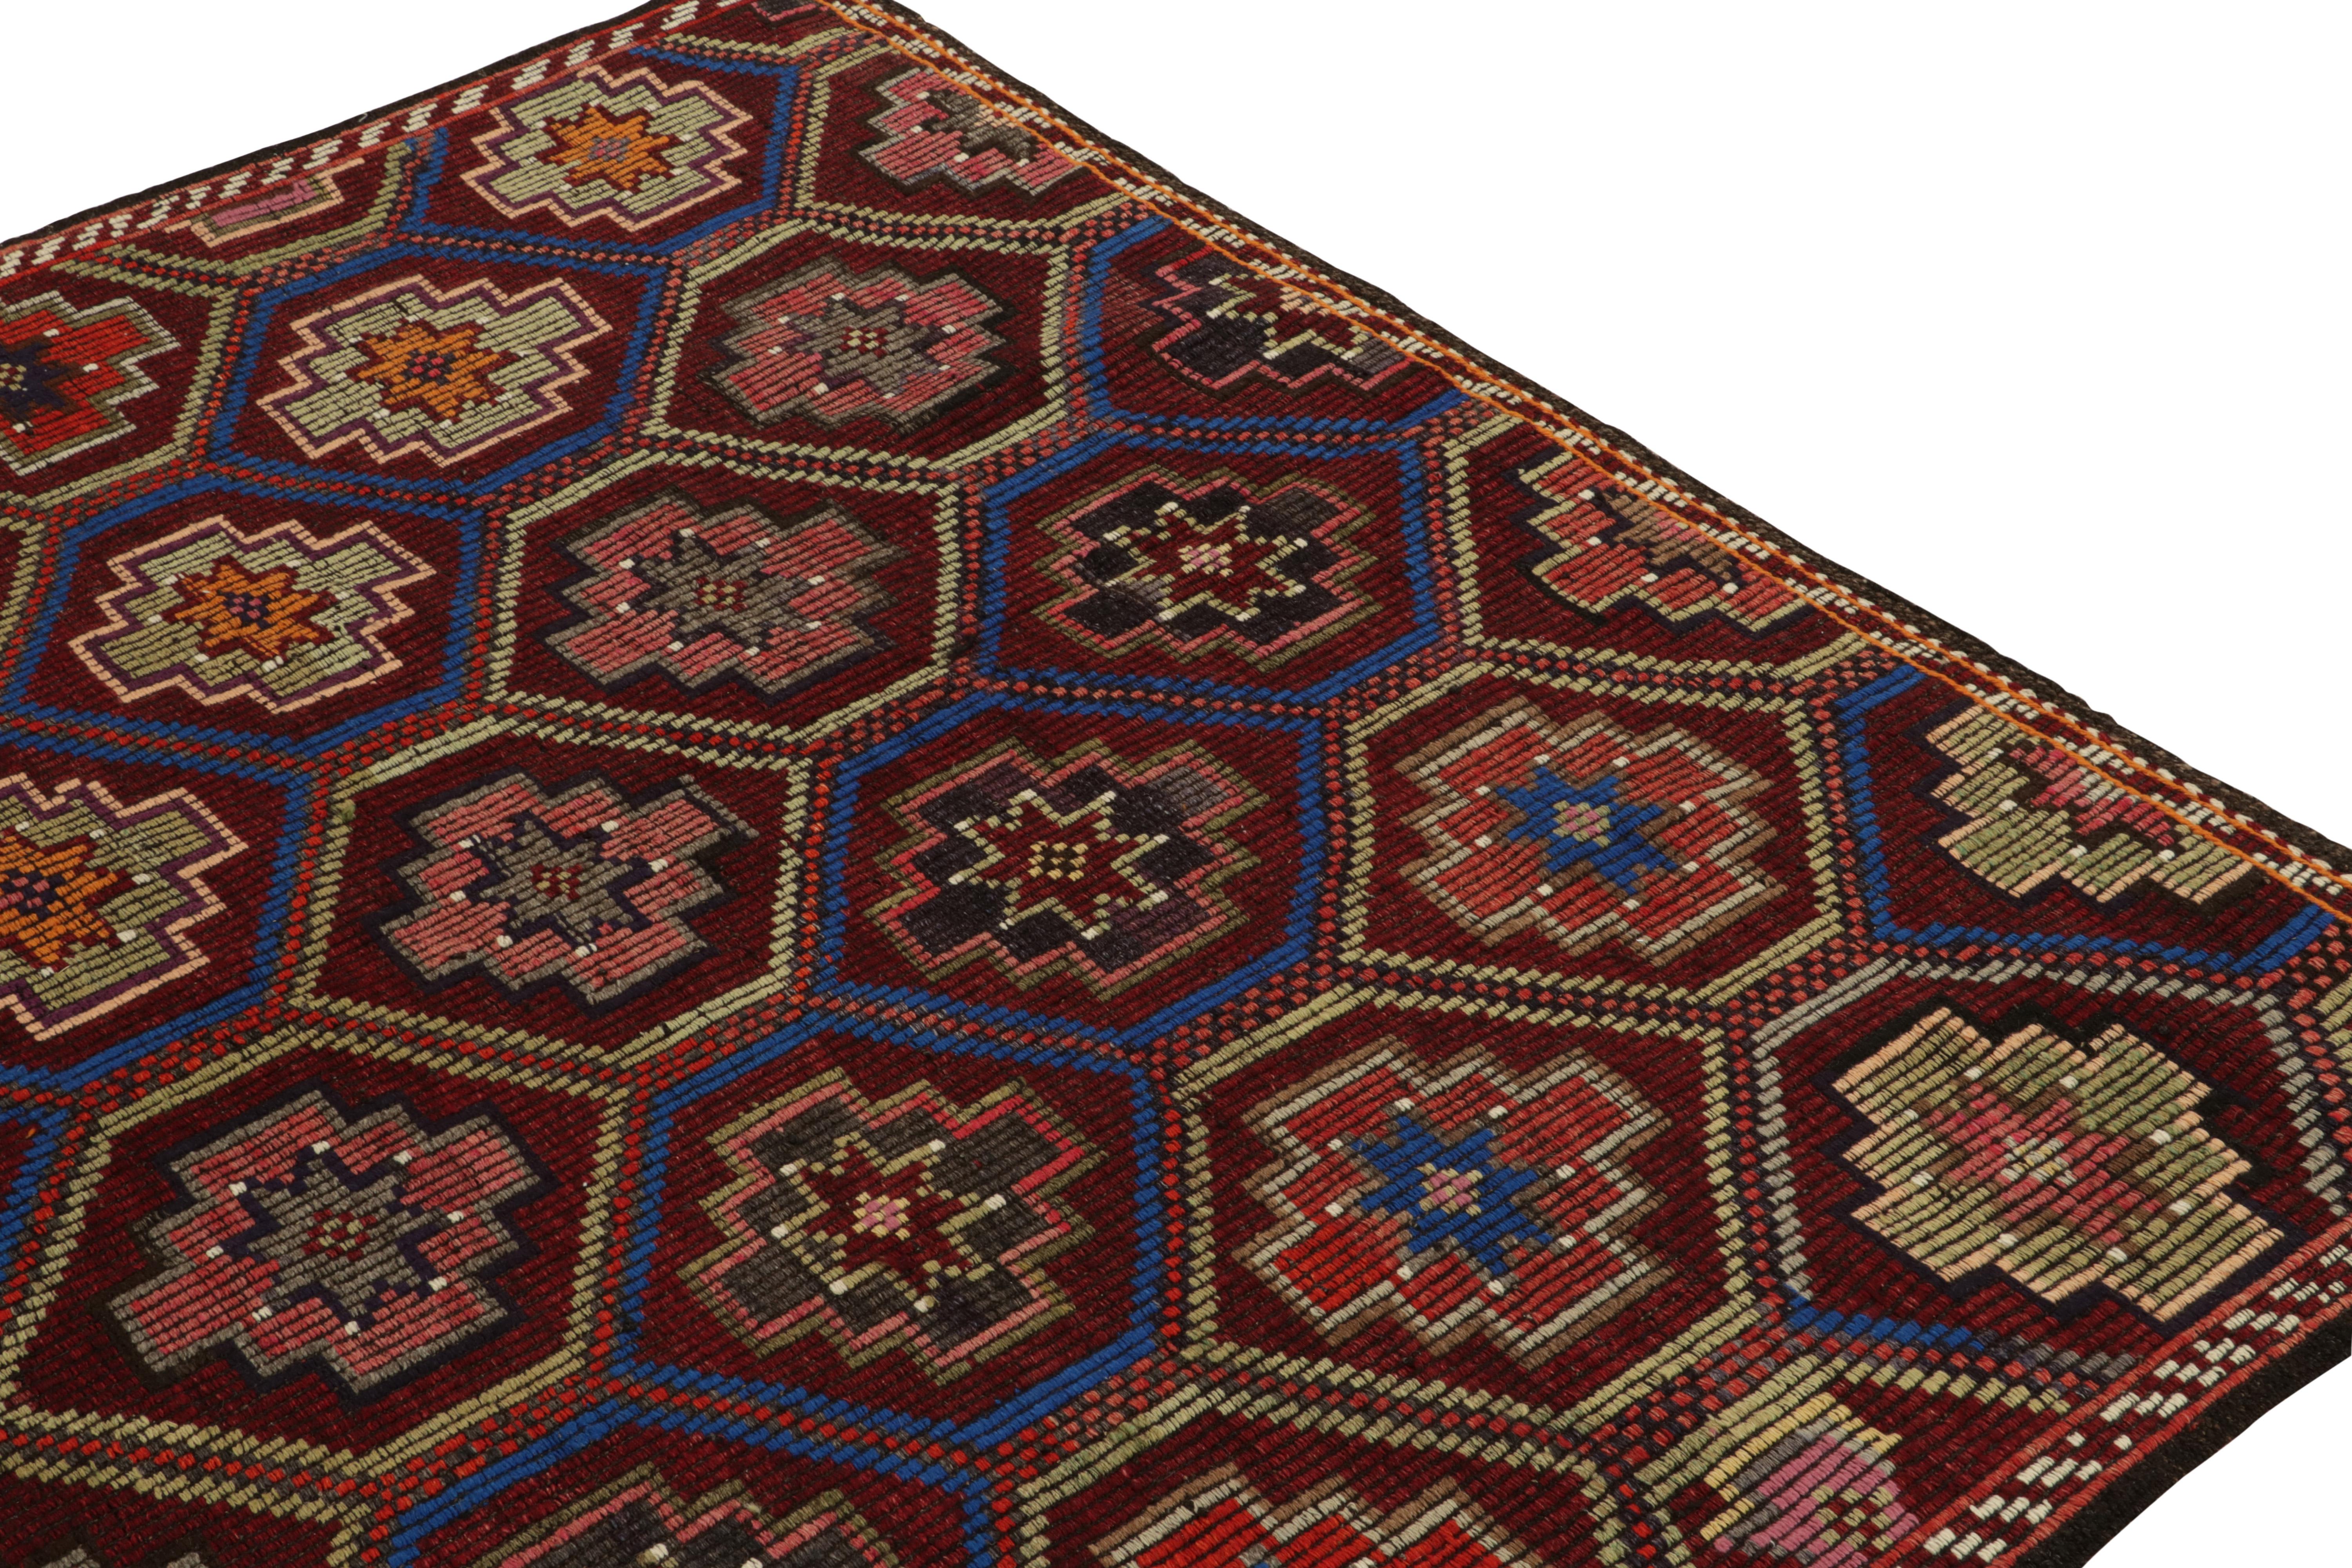 Hand-Knotted Vintage Kilim Rug in Red, Multicolor Tribal Geometric Patterns by Rug & Kilim For Sale